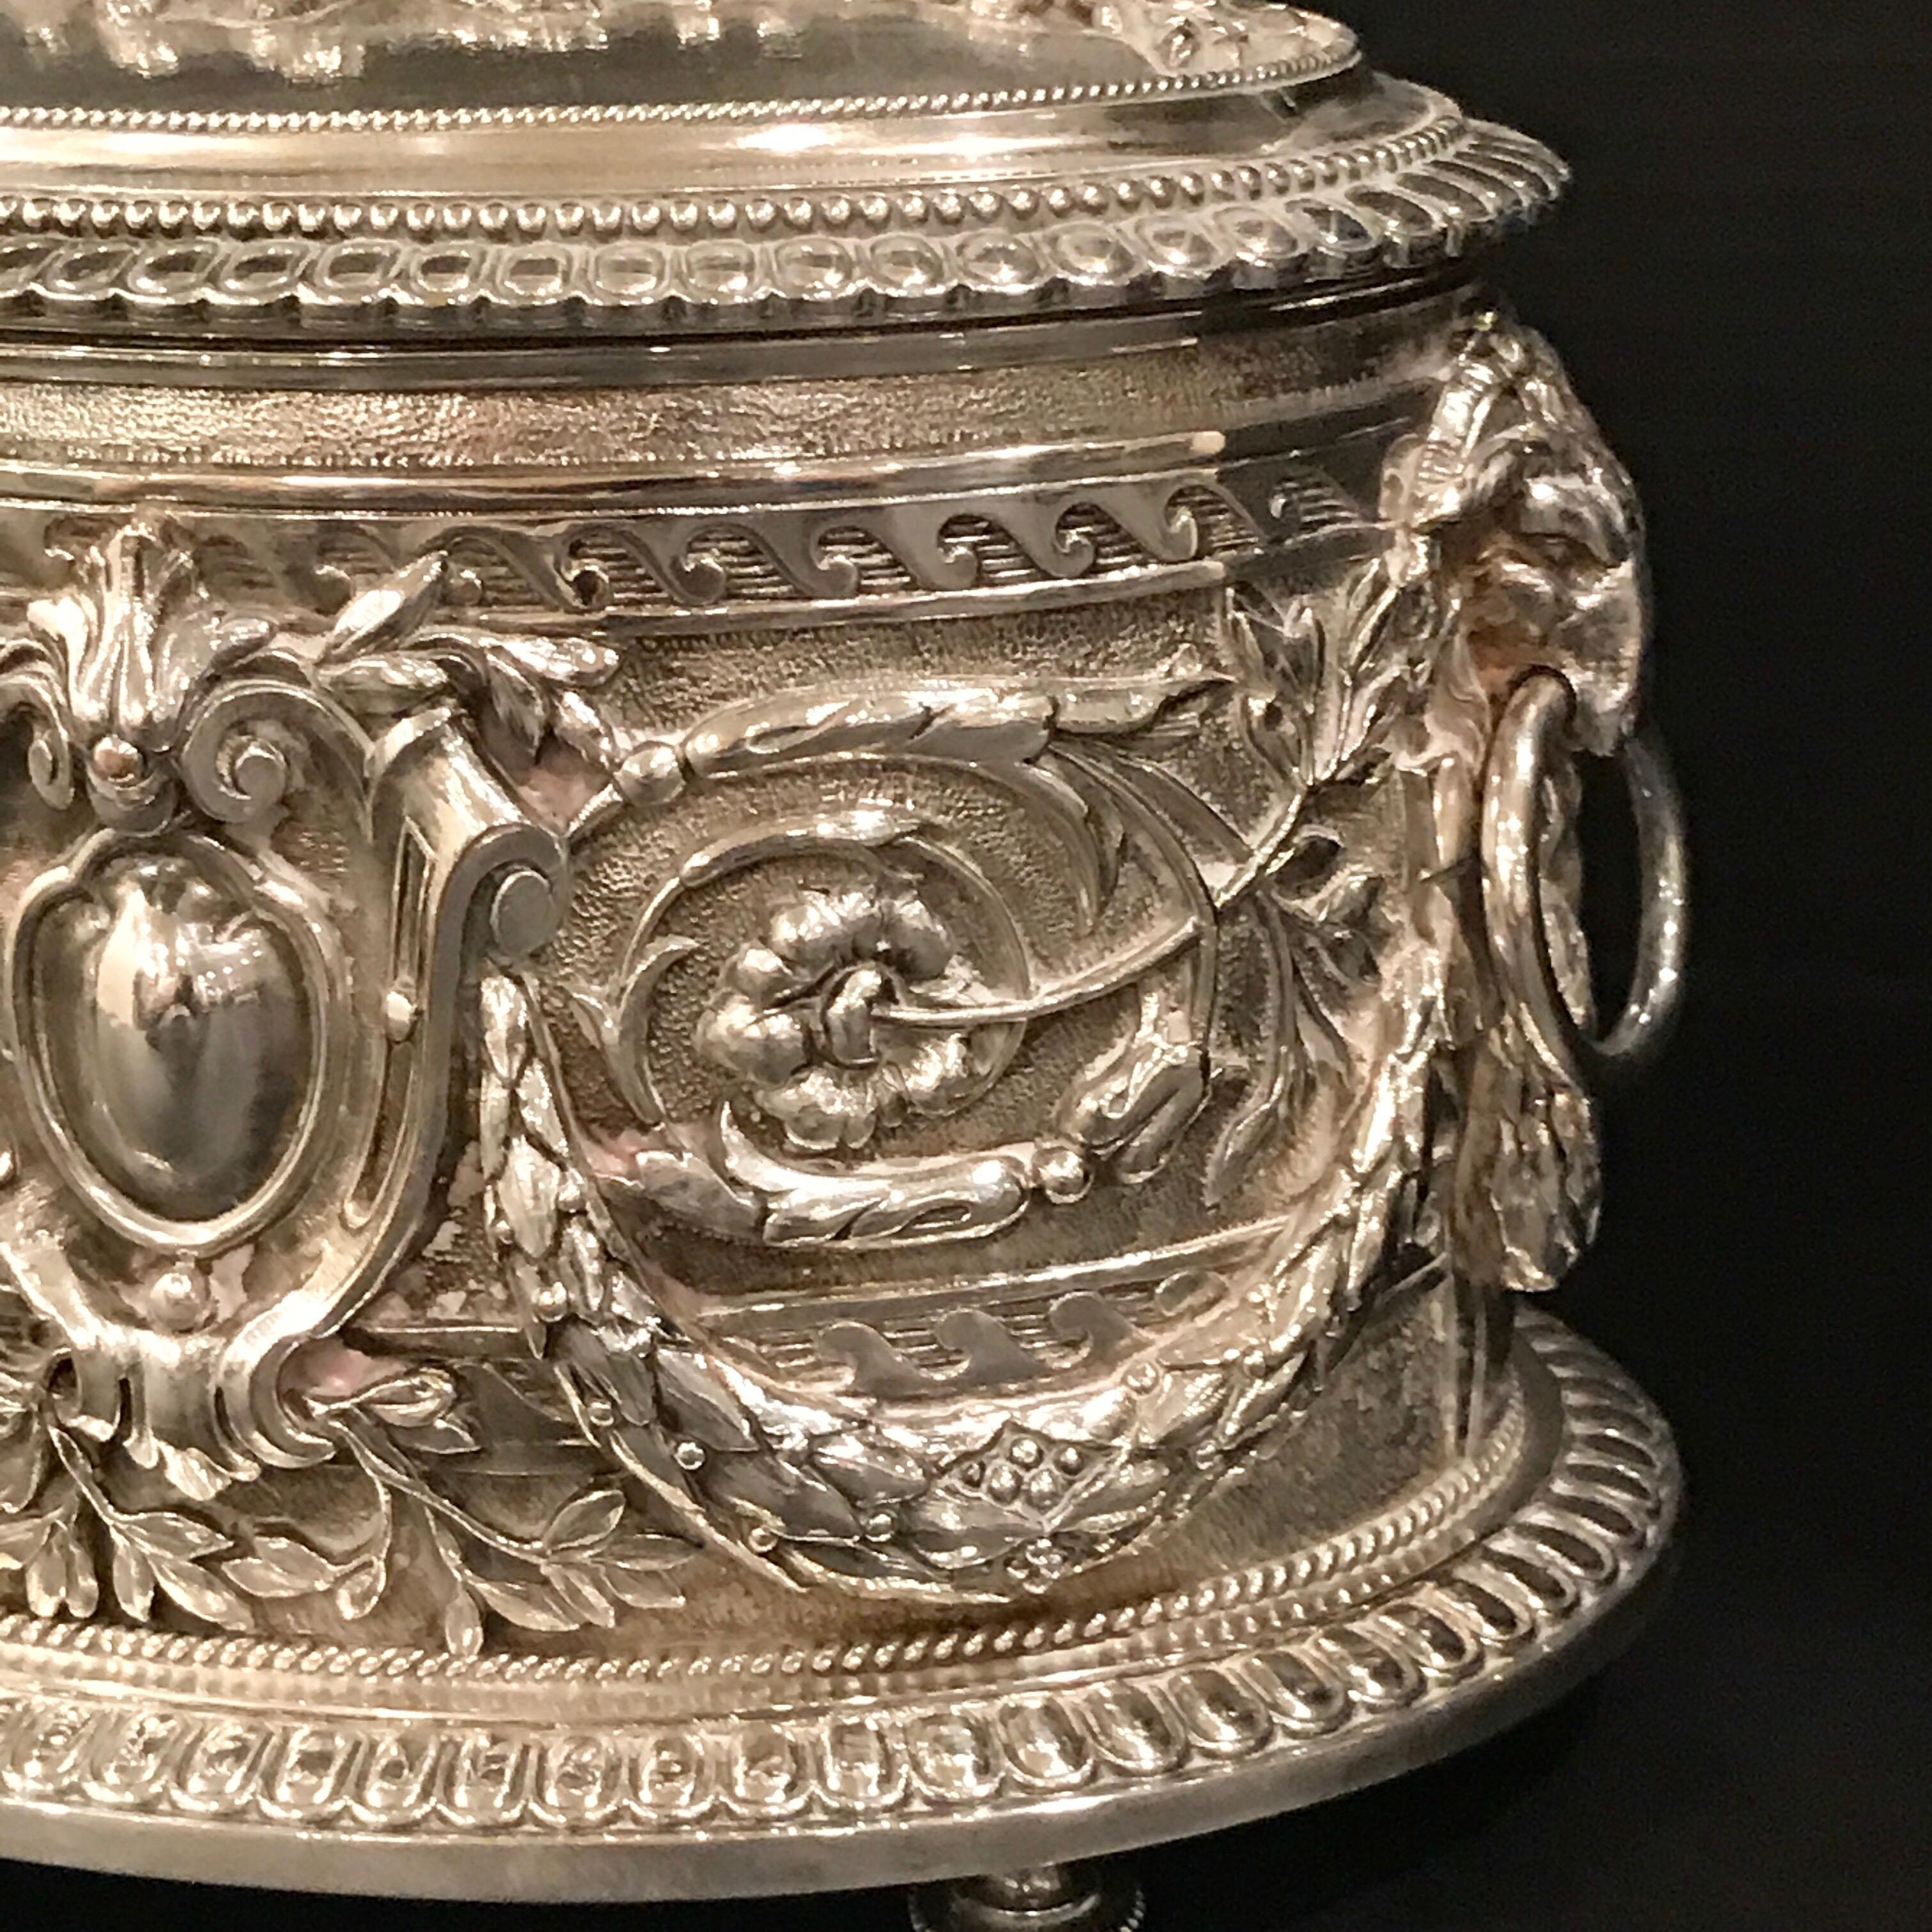 Repoussé English Silverplated Ornate Table Box by Hukin and Heath